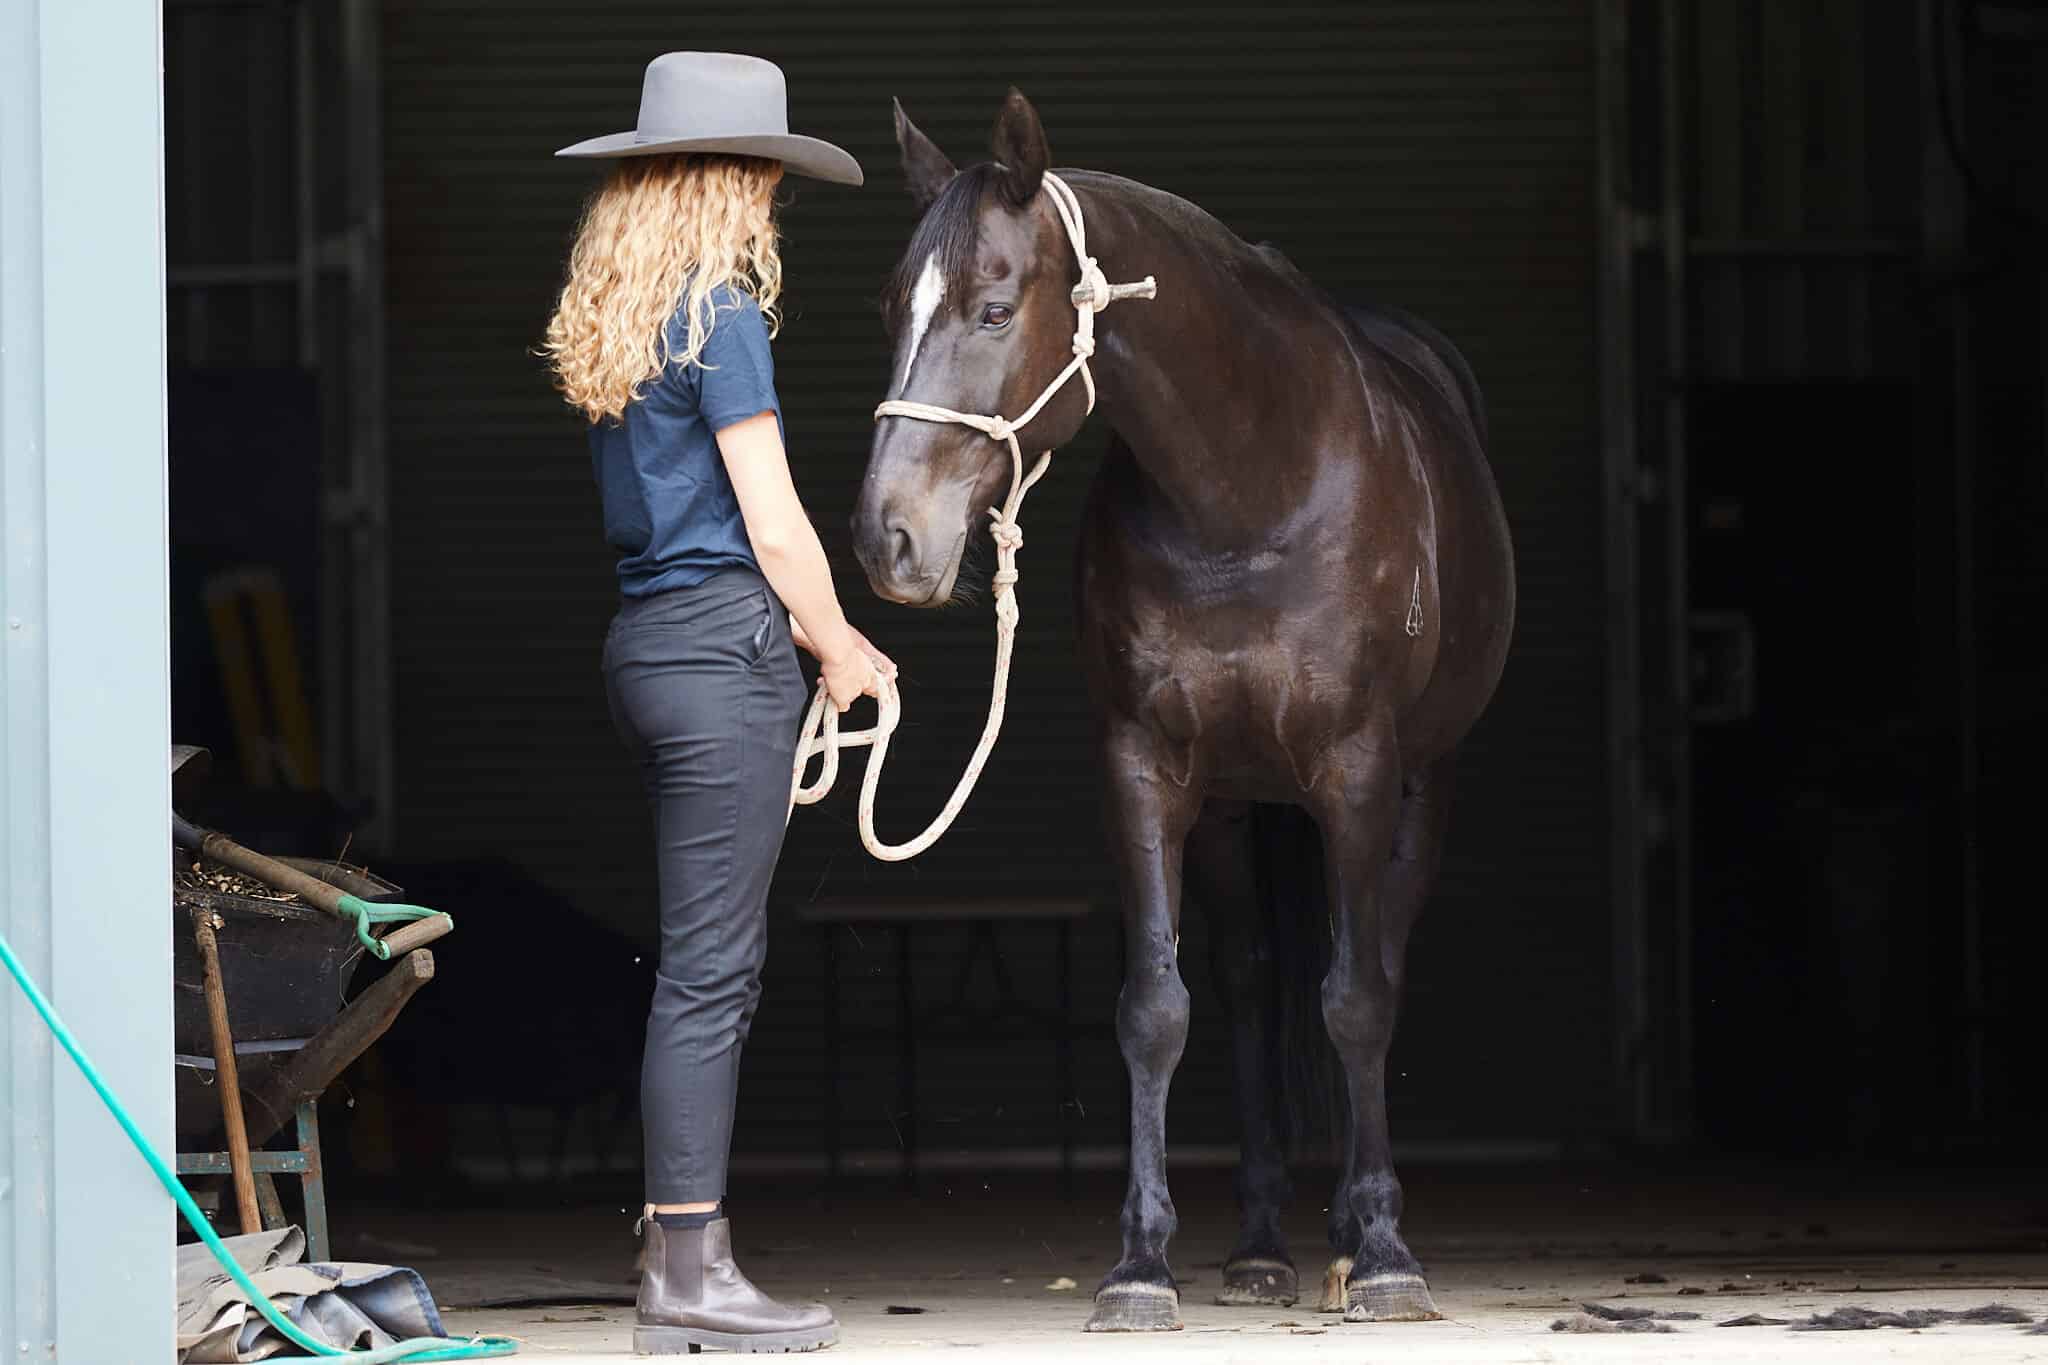 Types of exercise that benefit arthritic horses